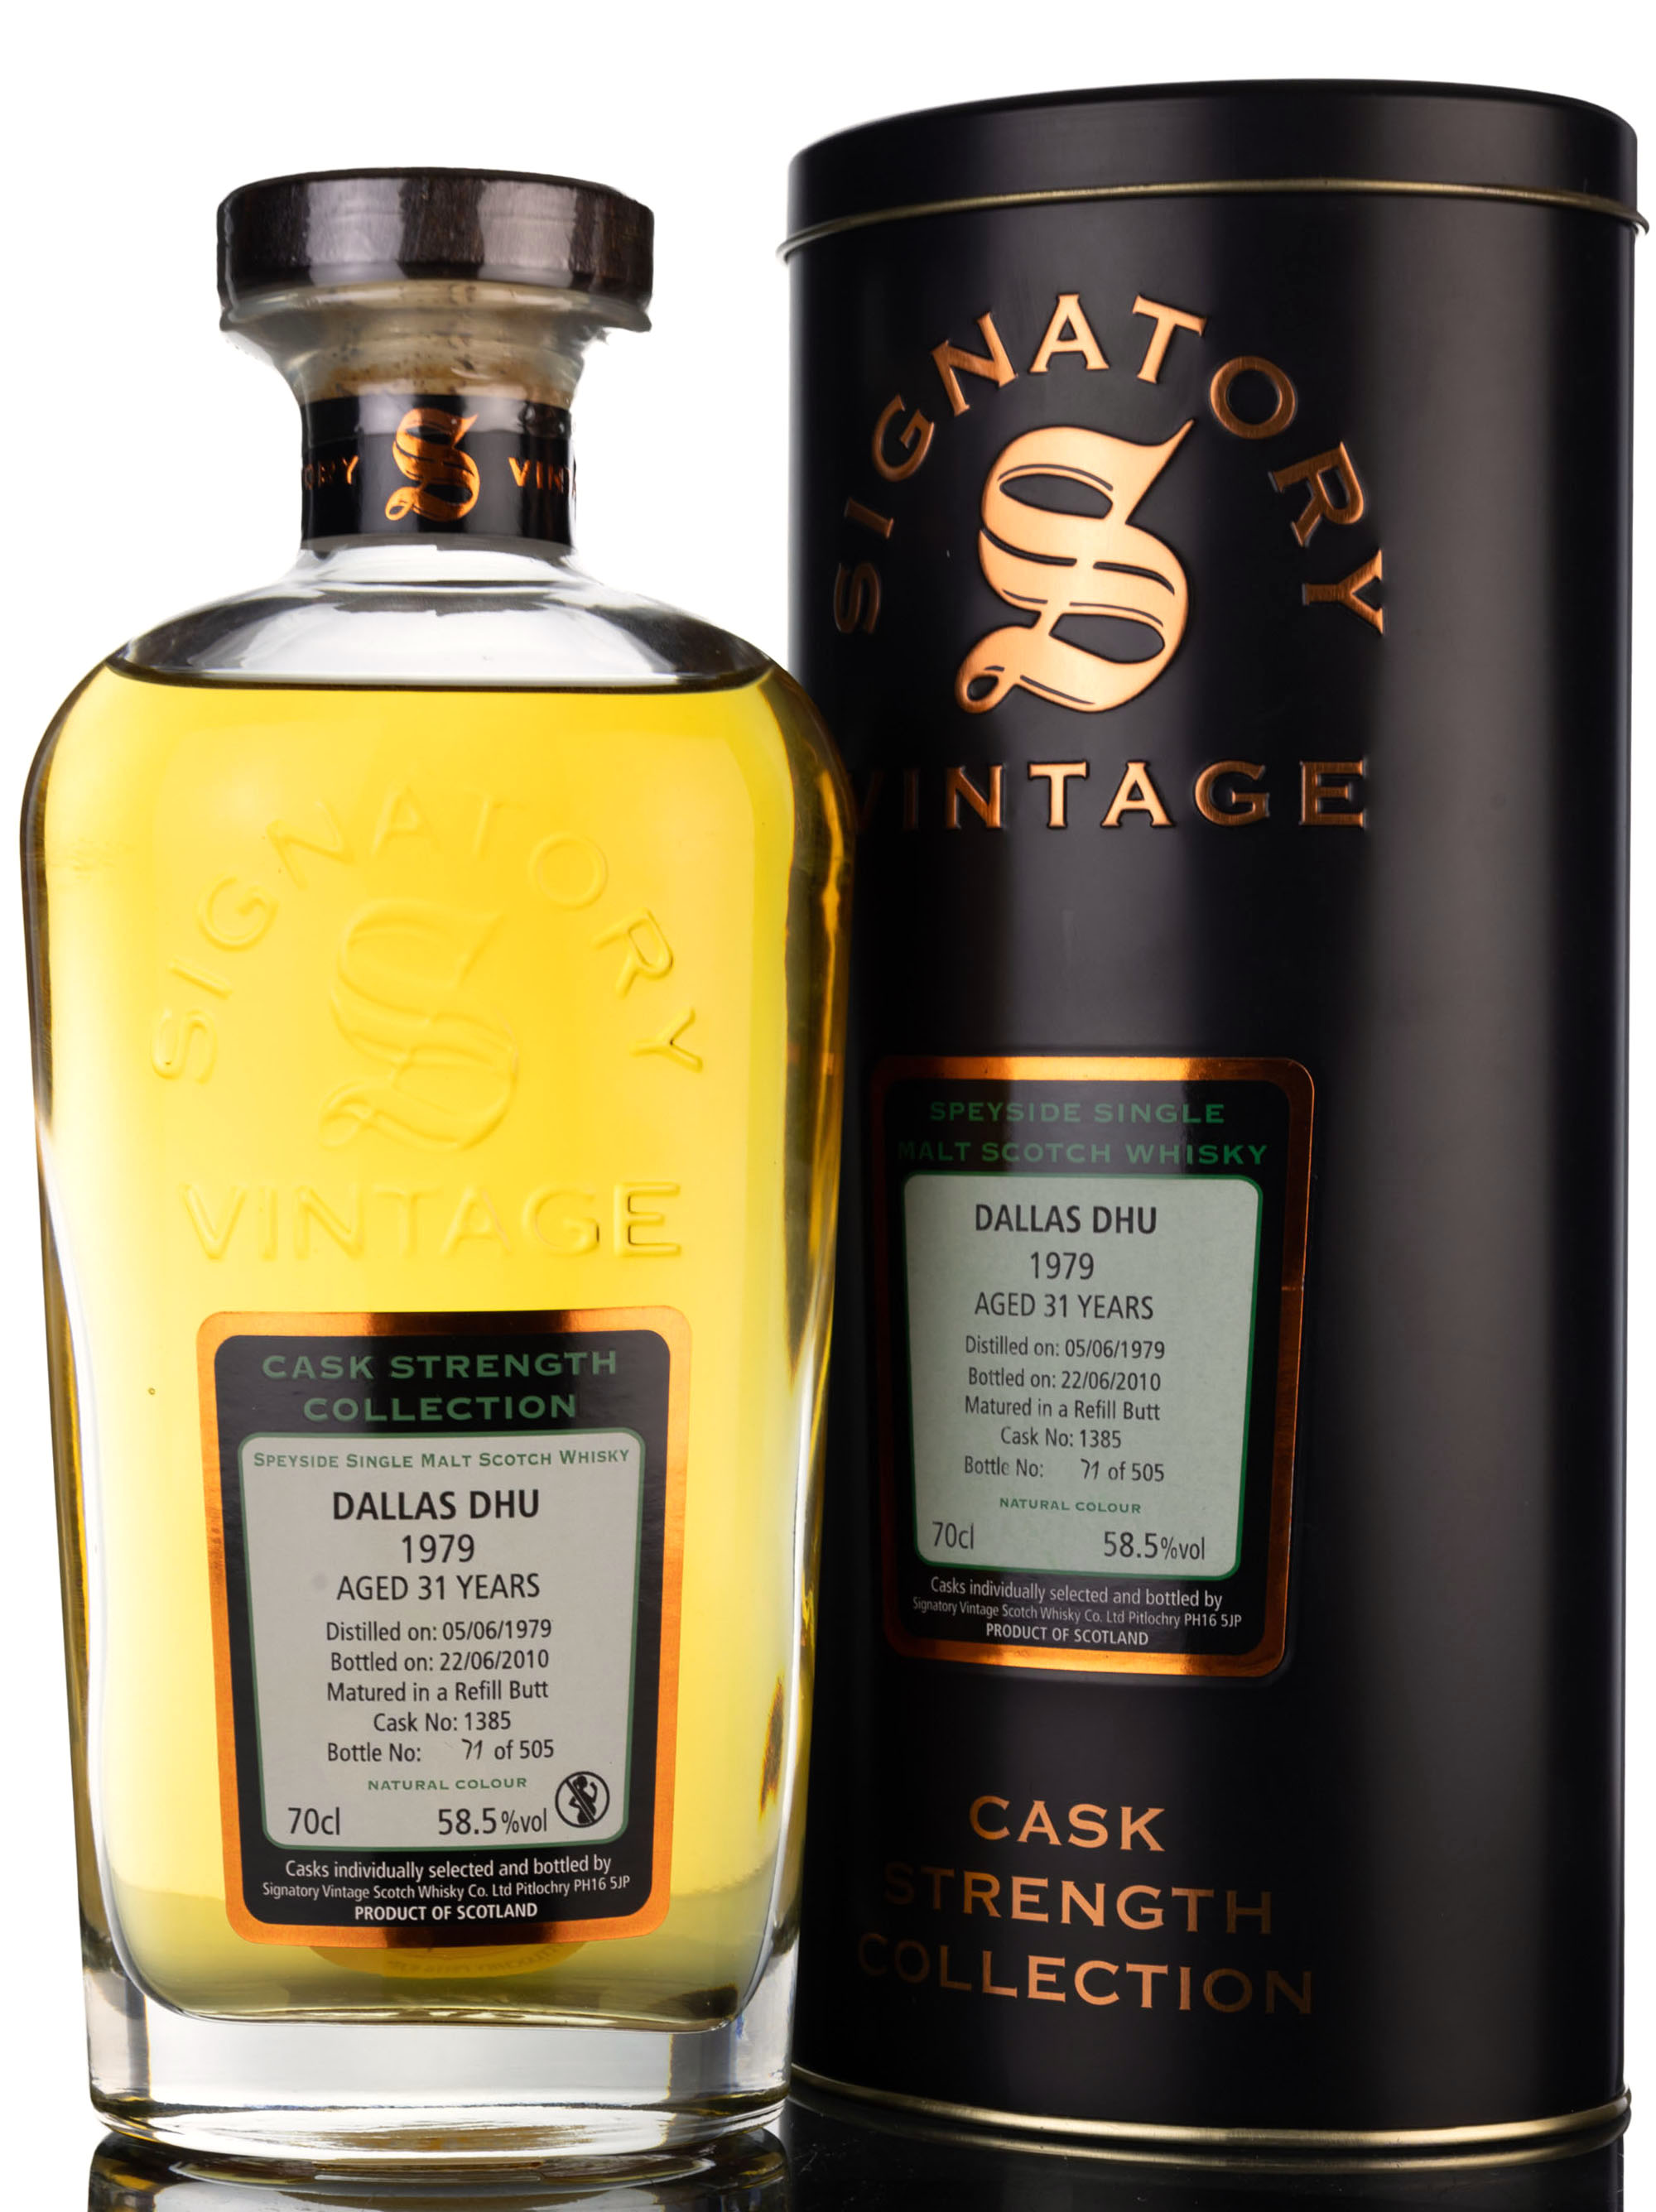 Dallas Dhu 1979-2010 - 31 Year Old - Signatory Vintage - Cask Strength Collection - Single